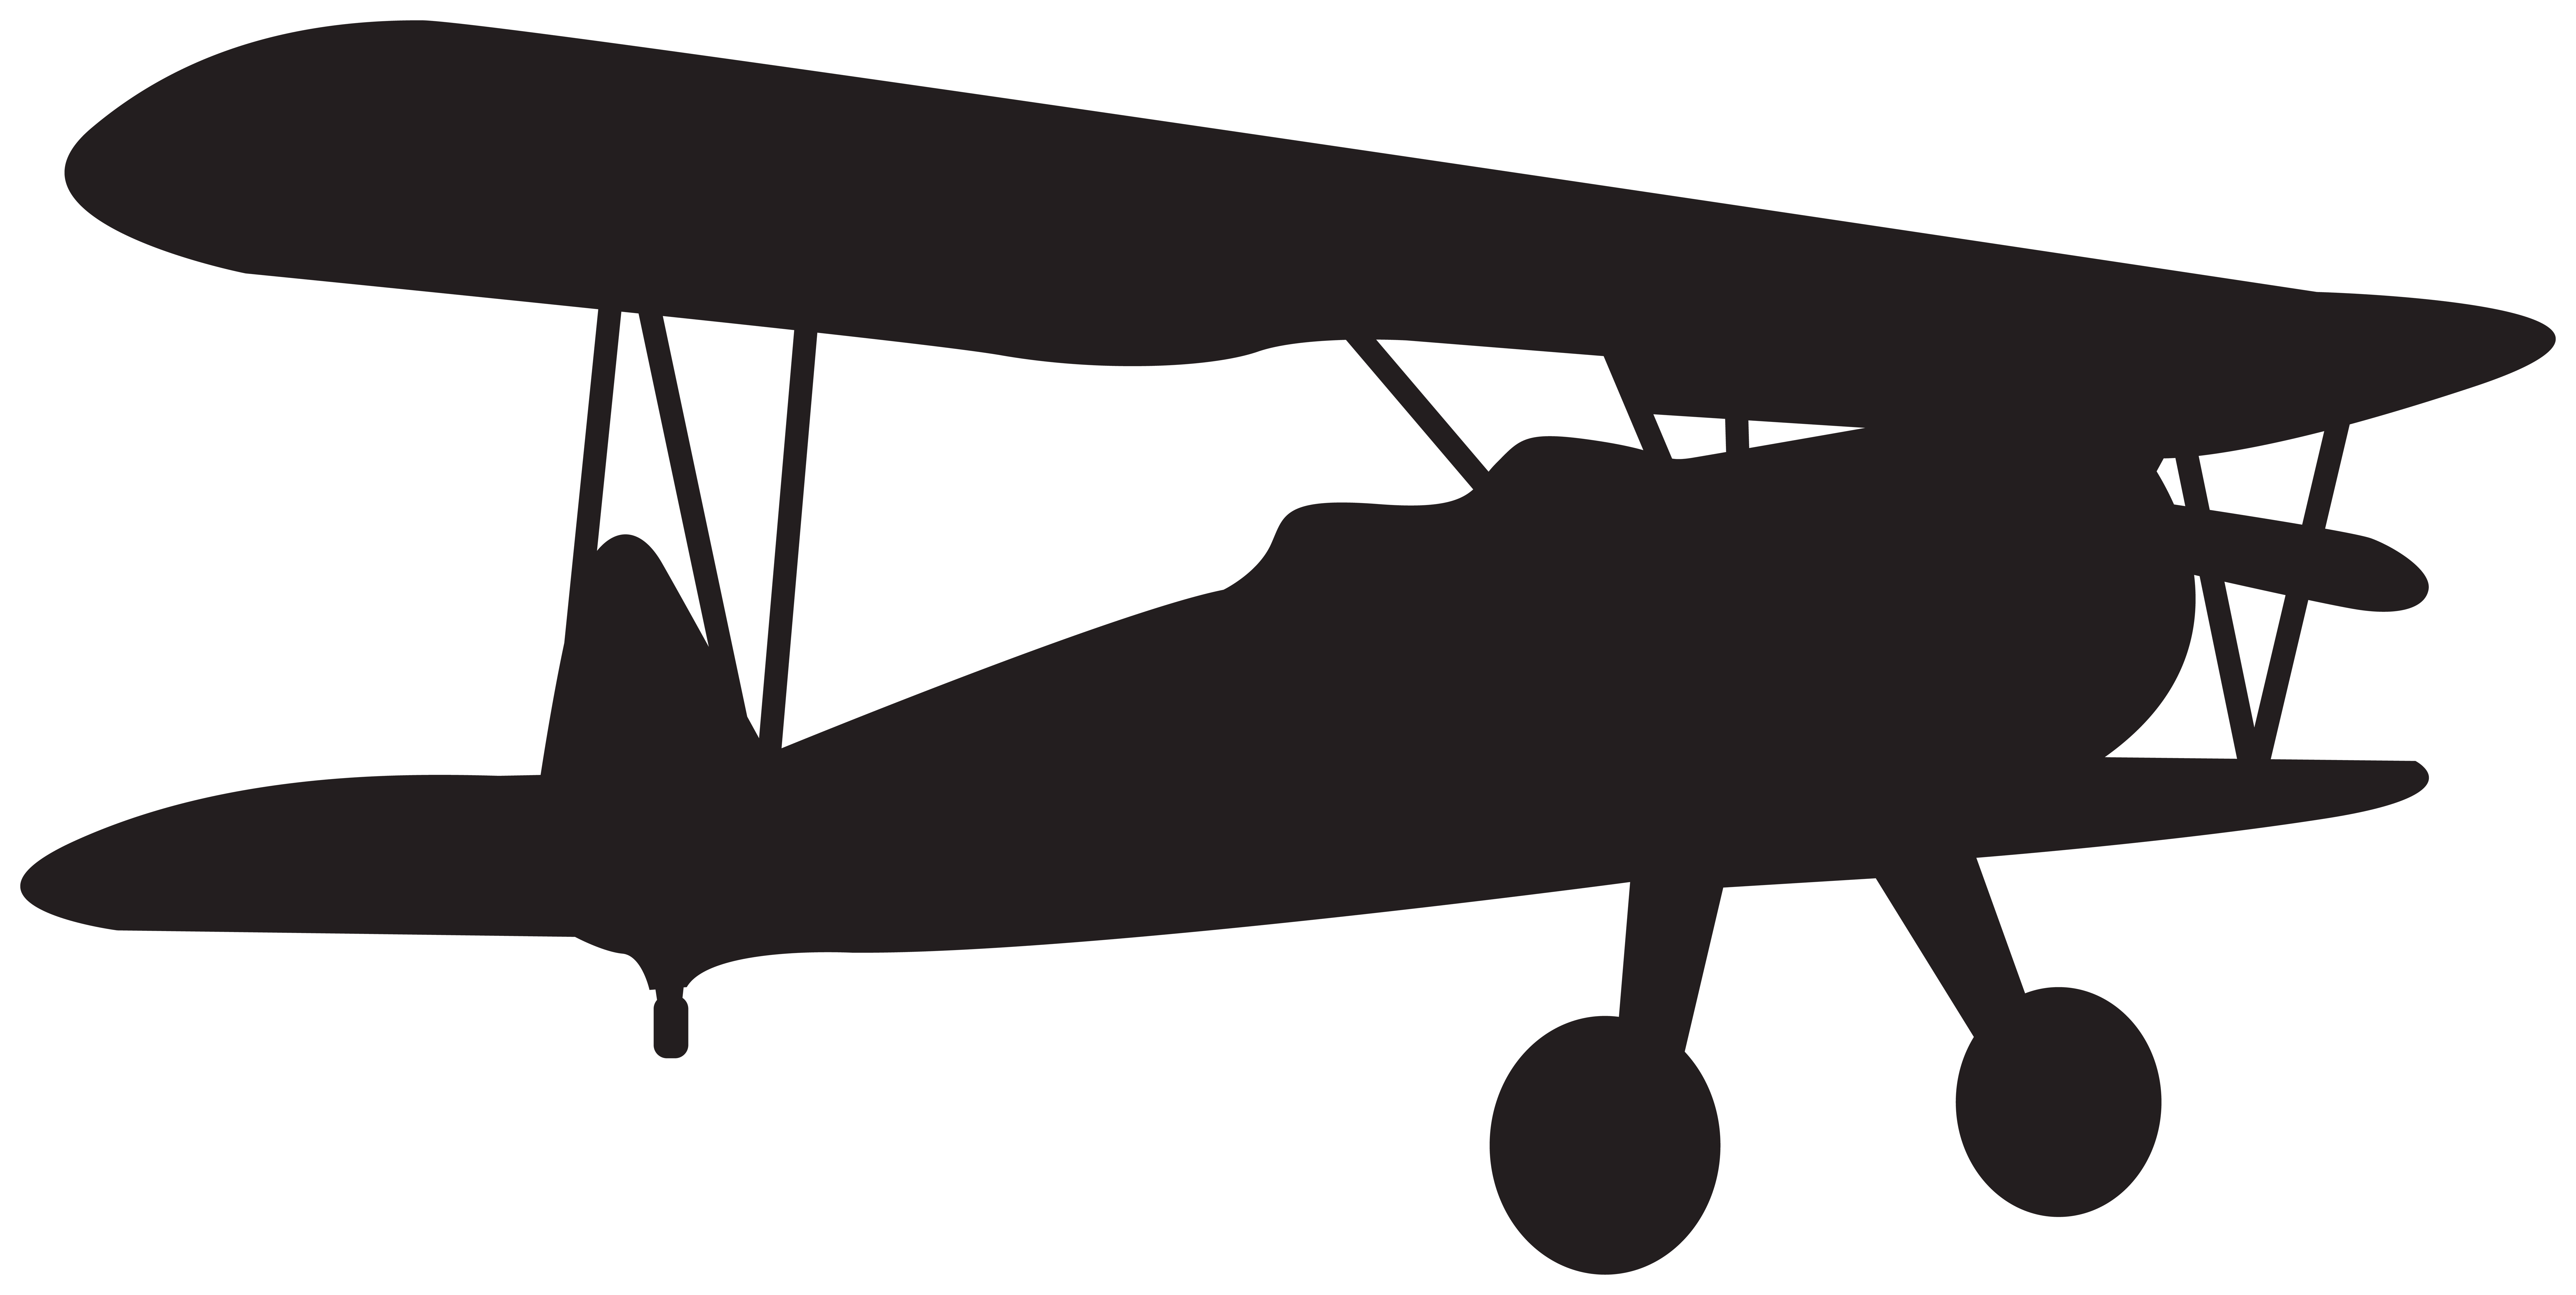 Clip art Airplane Aircraft Silhouette Portable Network Graphics.